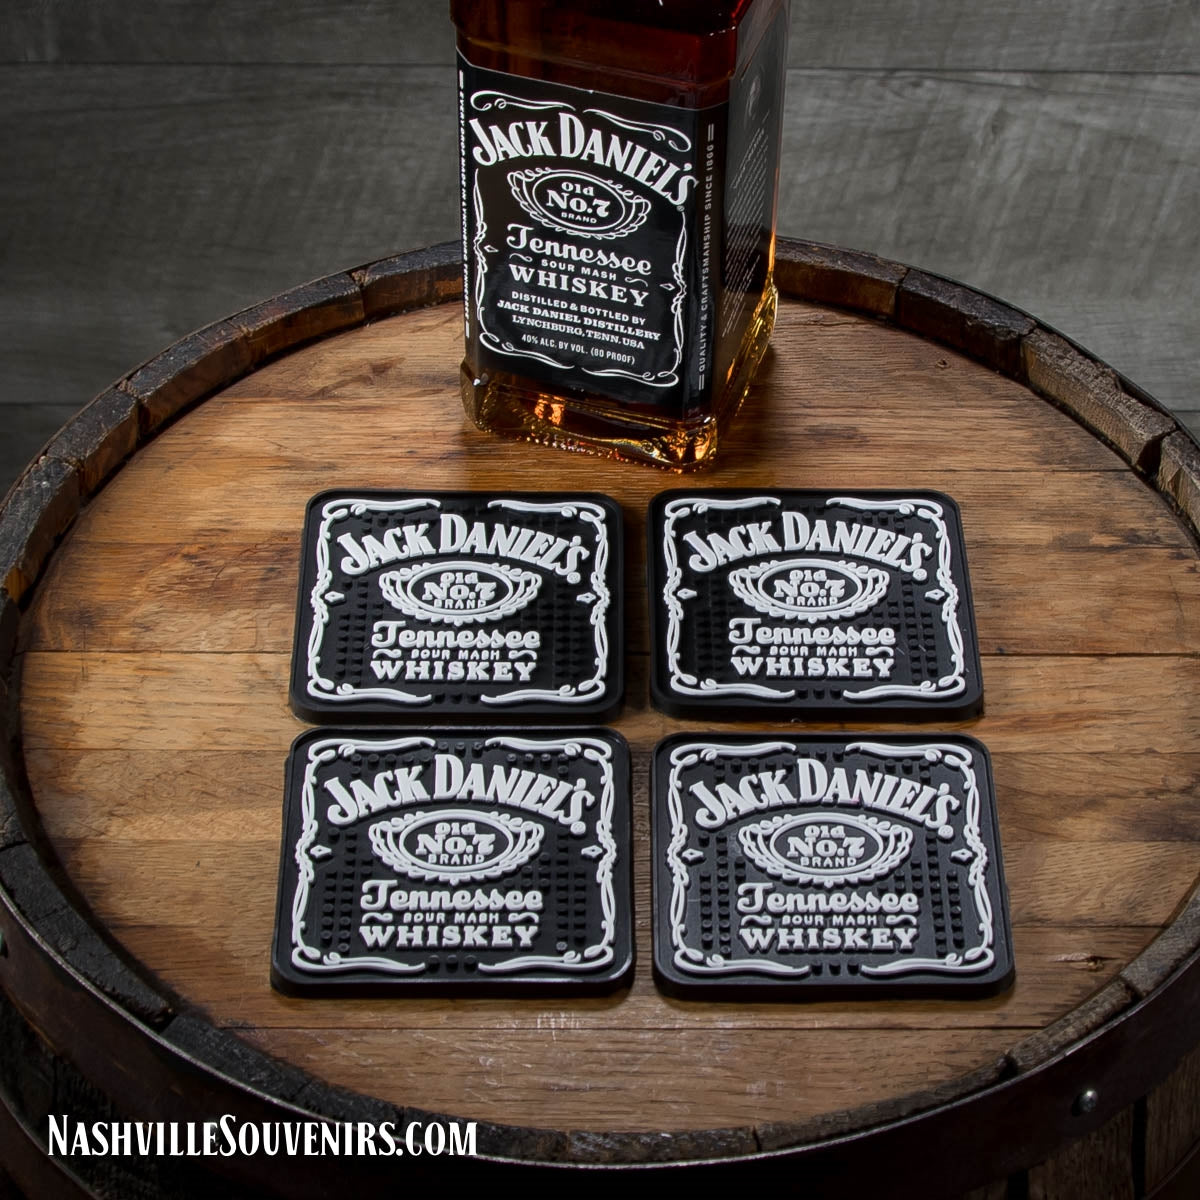 Show your Jack style in the home bar with this Jack Daniels Coaster Set. Show your love of that great Tennessee Whiskey on this stylish home bar accessory. Get yours today with FREE SHIPPING in the continental United States.